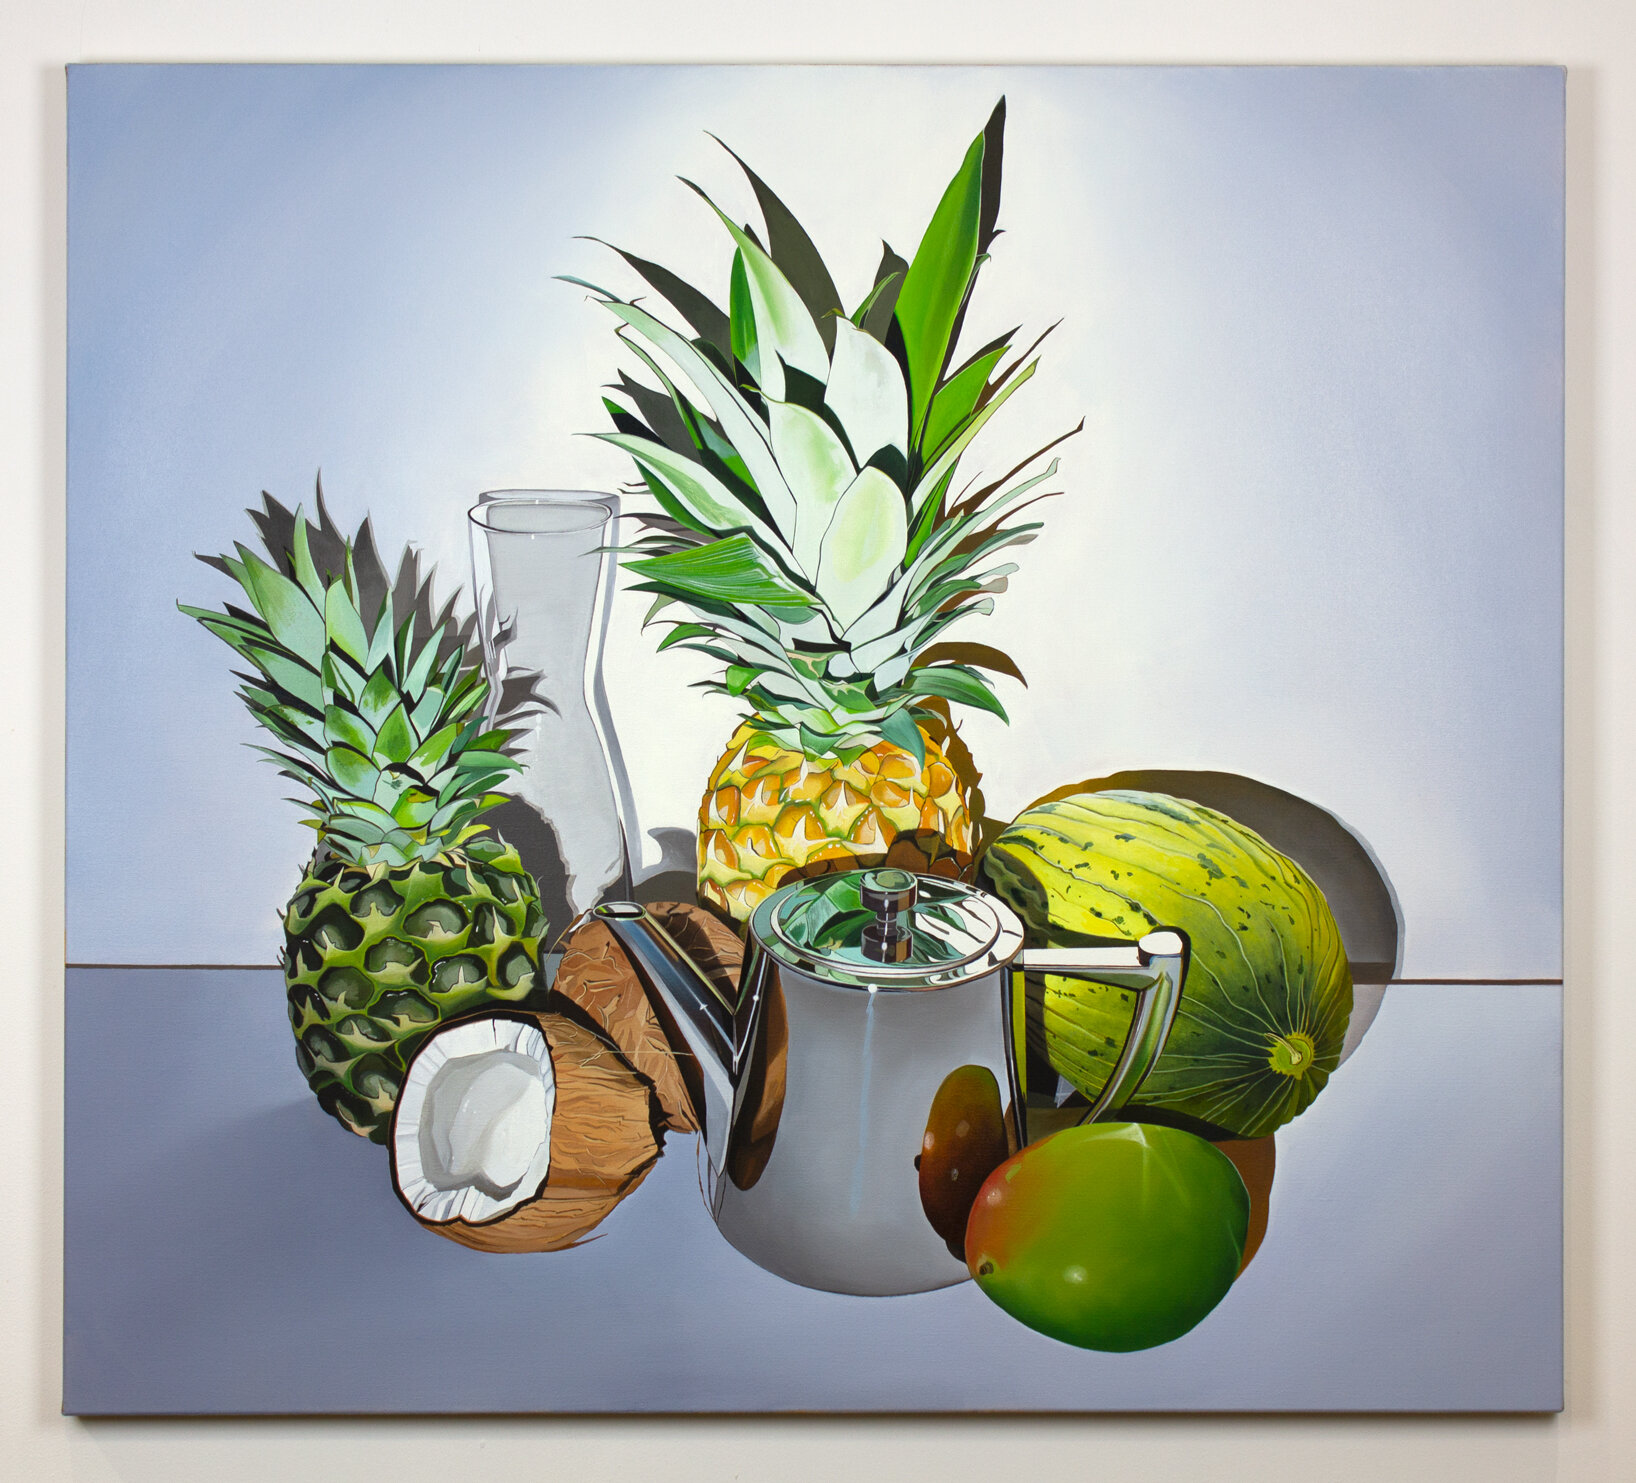  Tropical scene interrupted  Oil on linen  90 x 100cm  Private Collection   